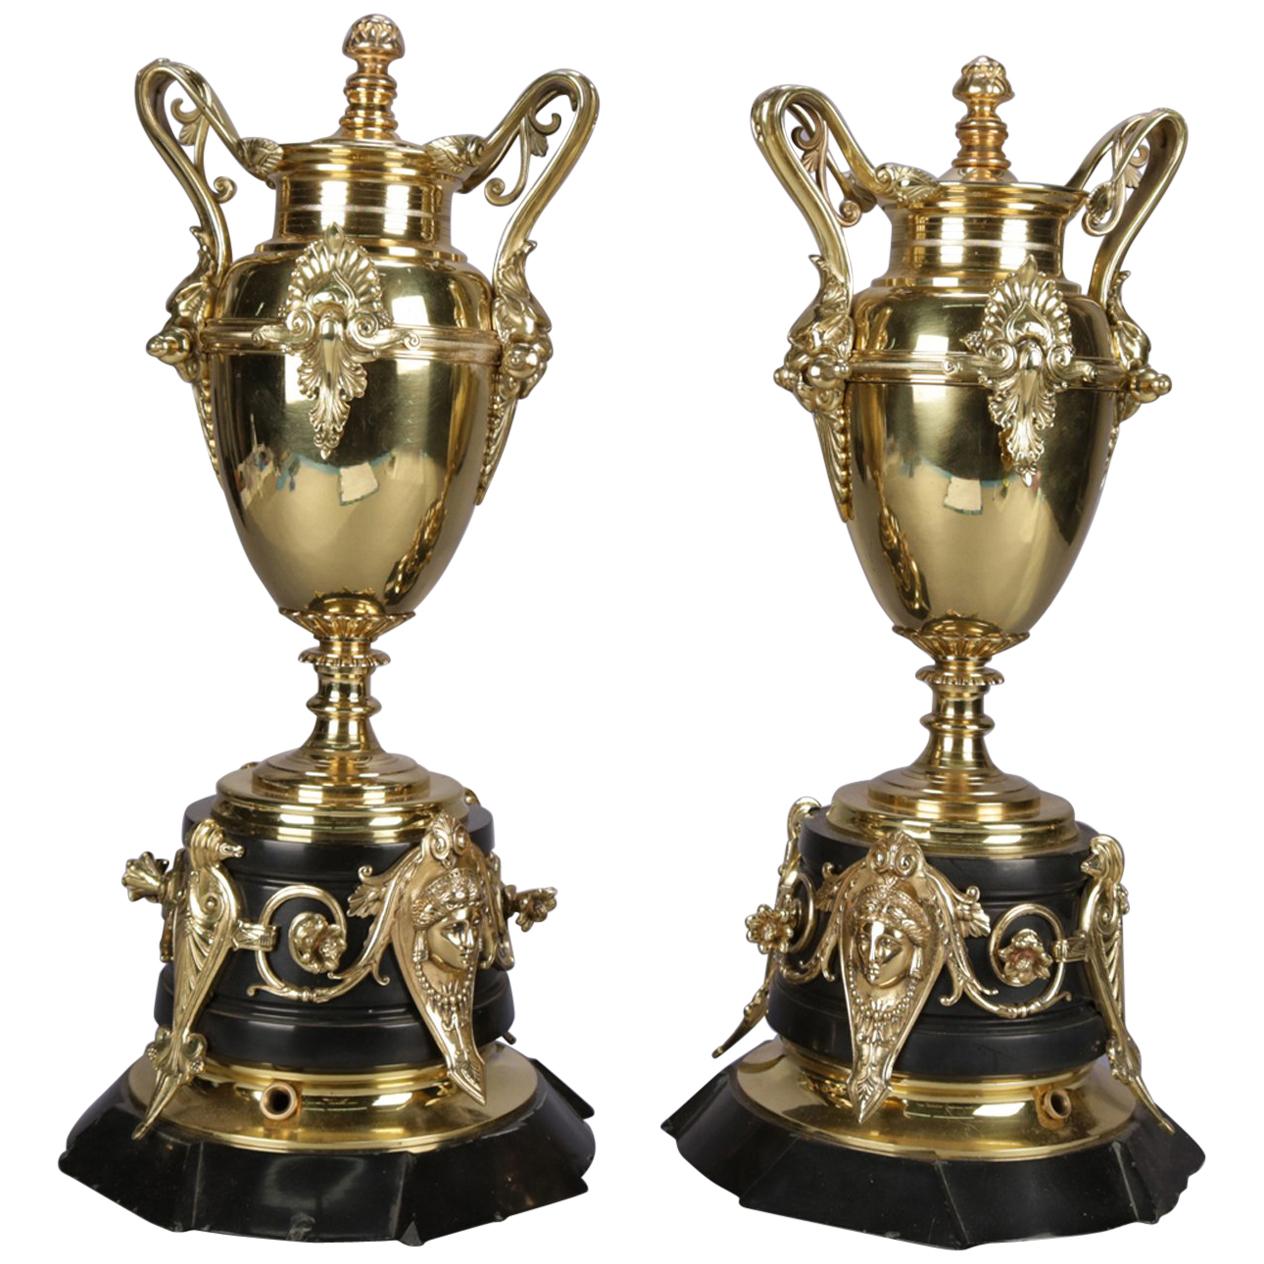 Pair of Italian Egyptian Revival Polished Bronze and Marble Figural Urns